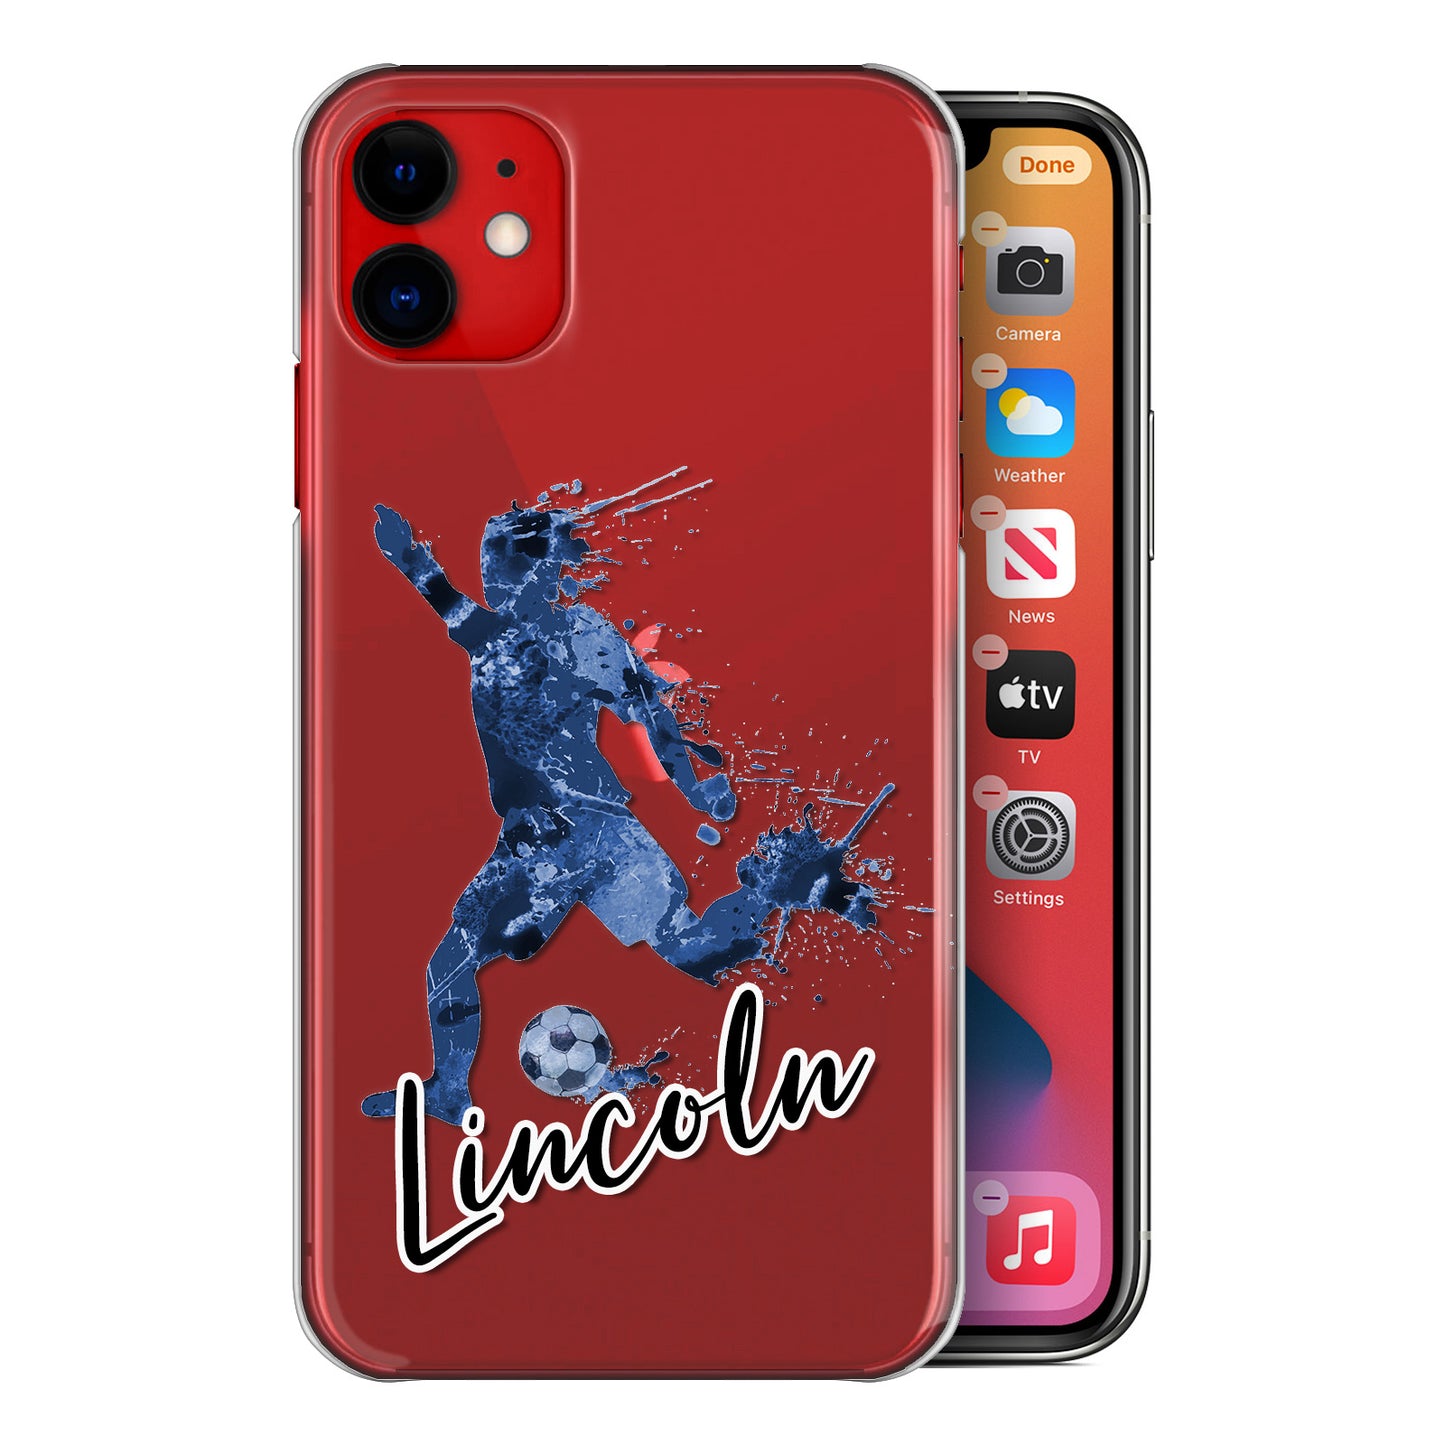 Personalised Huawei Phone Hard Case - Vivid Blue Football Star with White Outlined Text